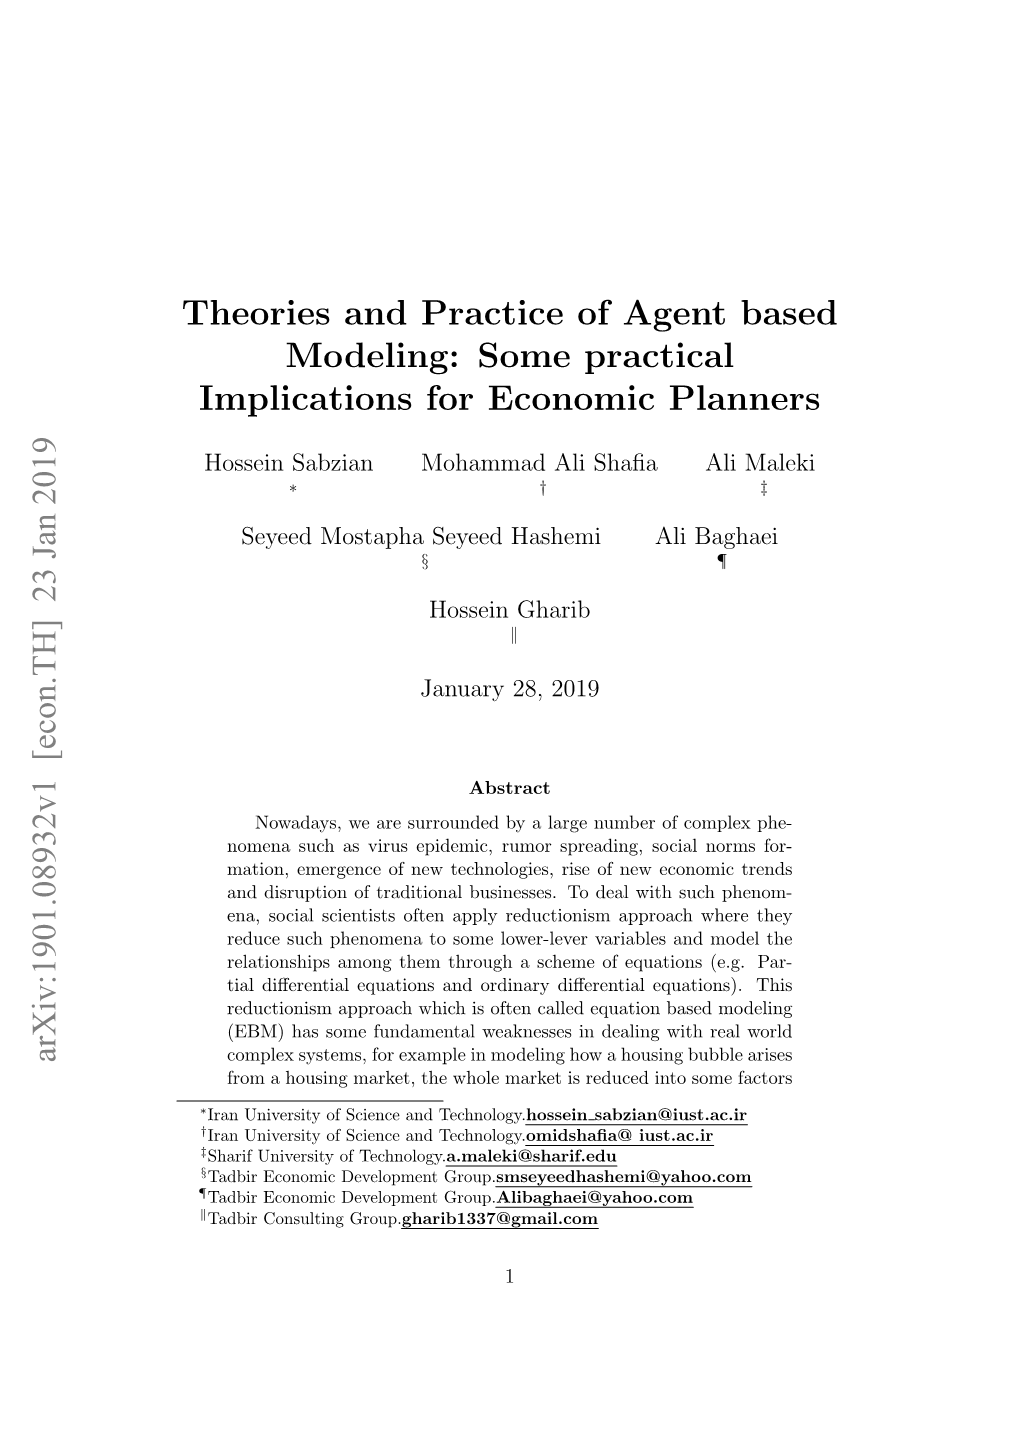 Theories and Practice of Agent Based Modeling: Some Practical Implications for Economic Planners